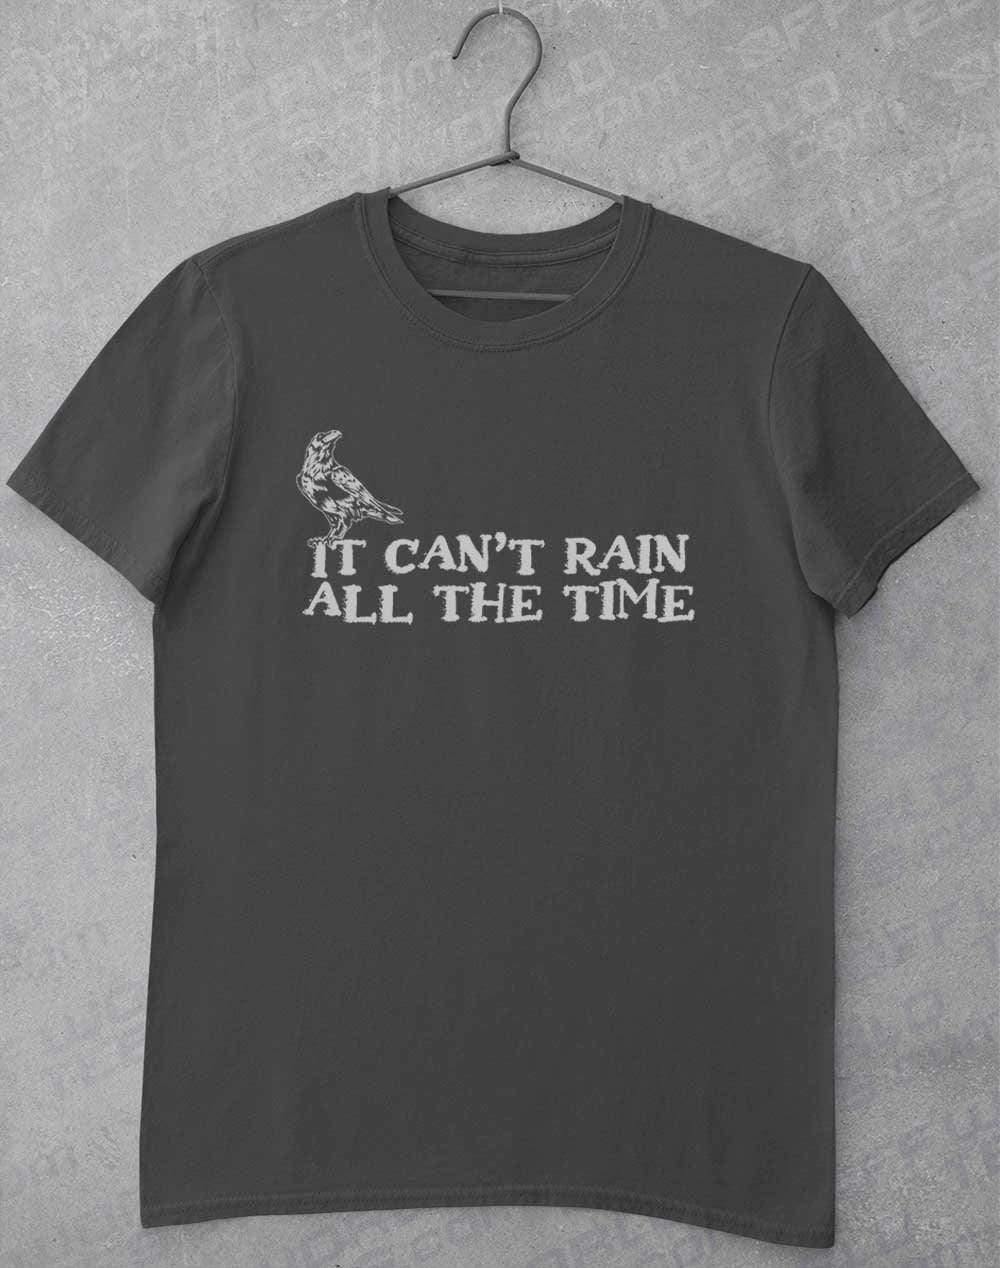 It Can't Rain All the Time T-Shirt S / Charcoal  - Off World Tees